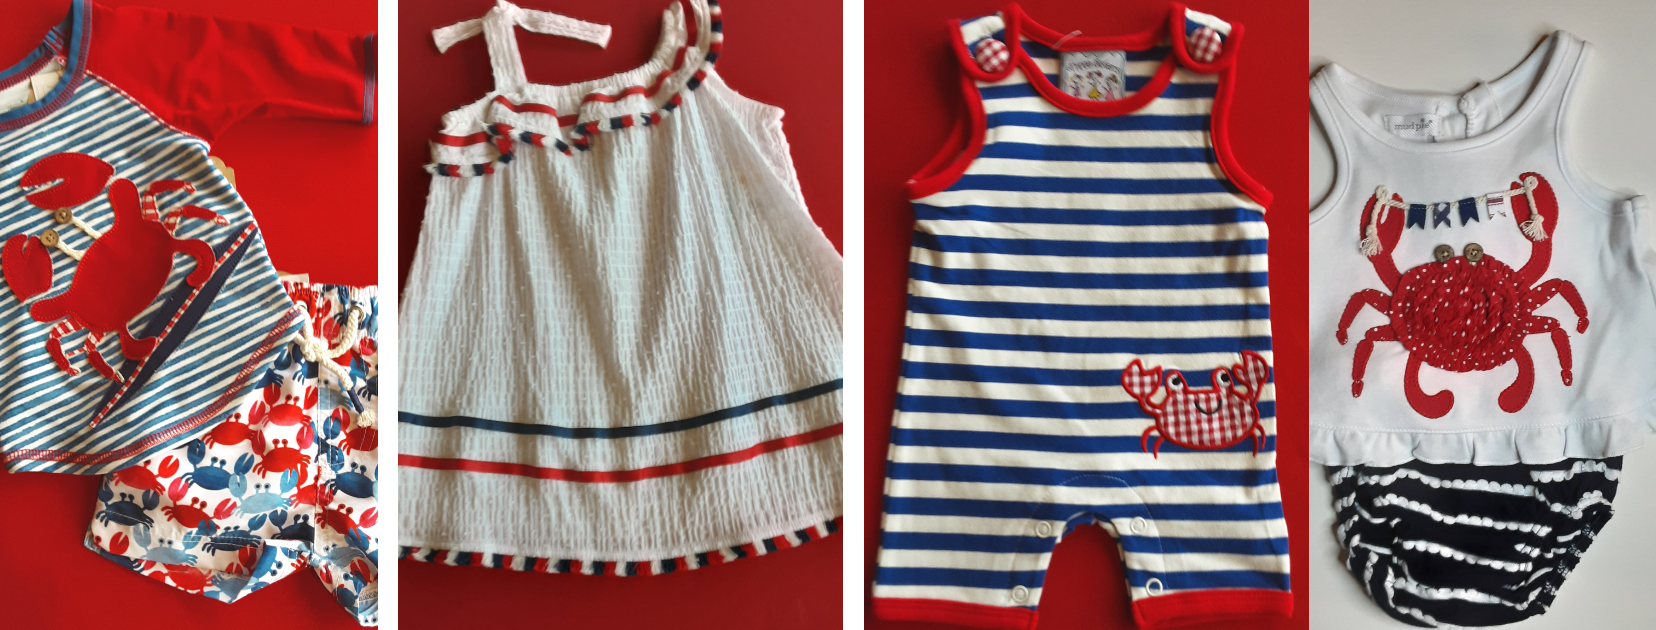 Patriotic Children's Clothing for infants, toddlers and girls 4-16 just in time for Memorial Day, Flag Day (Tuesday, June 14, 2022), July 4th, vacation and any other patriotic occasion.